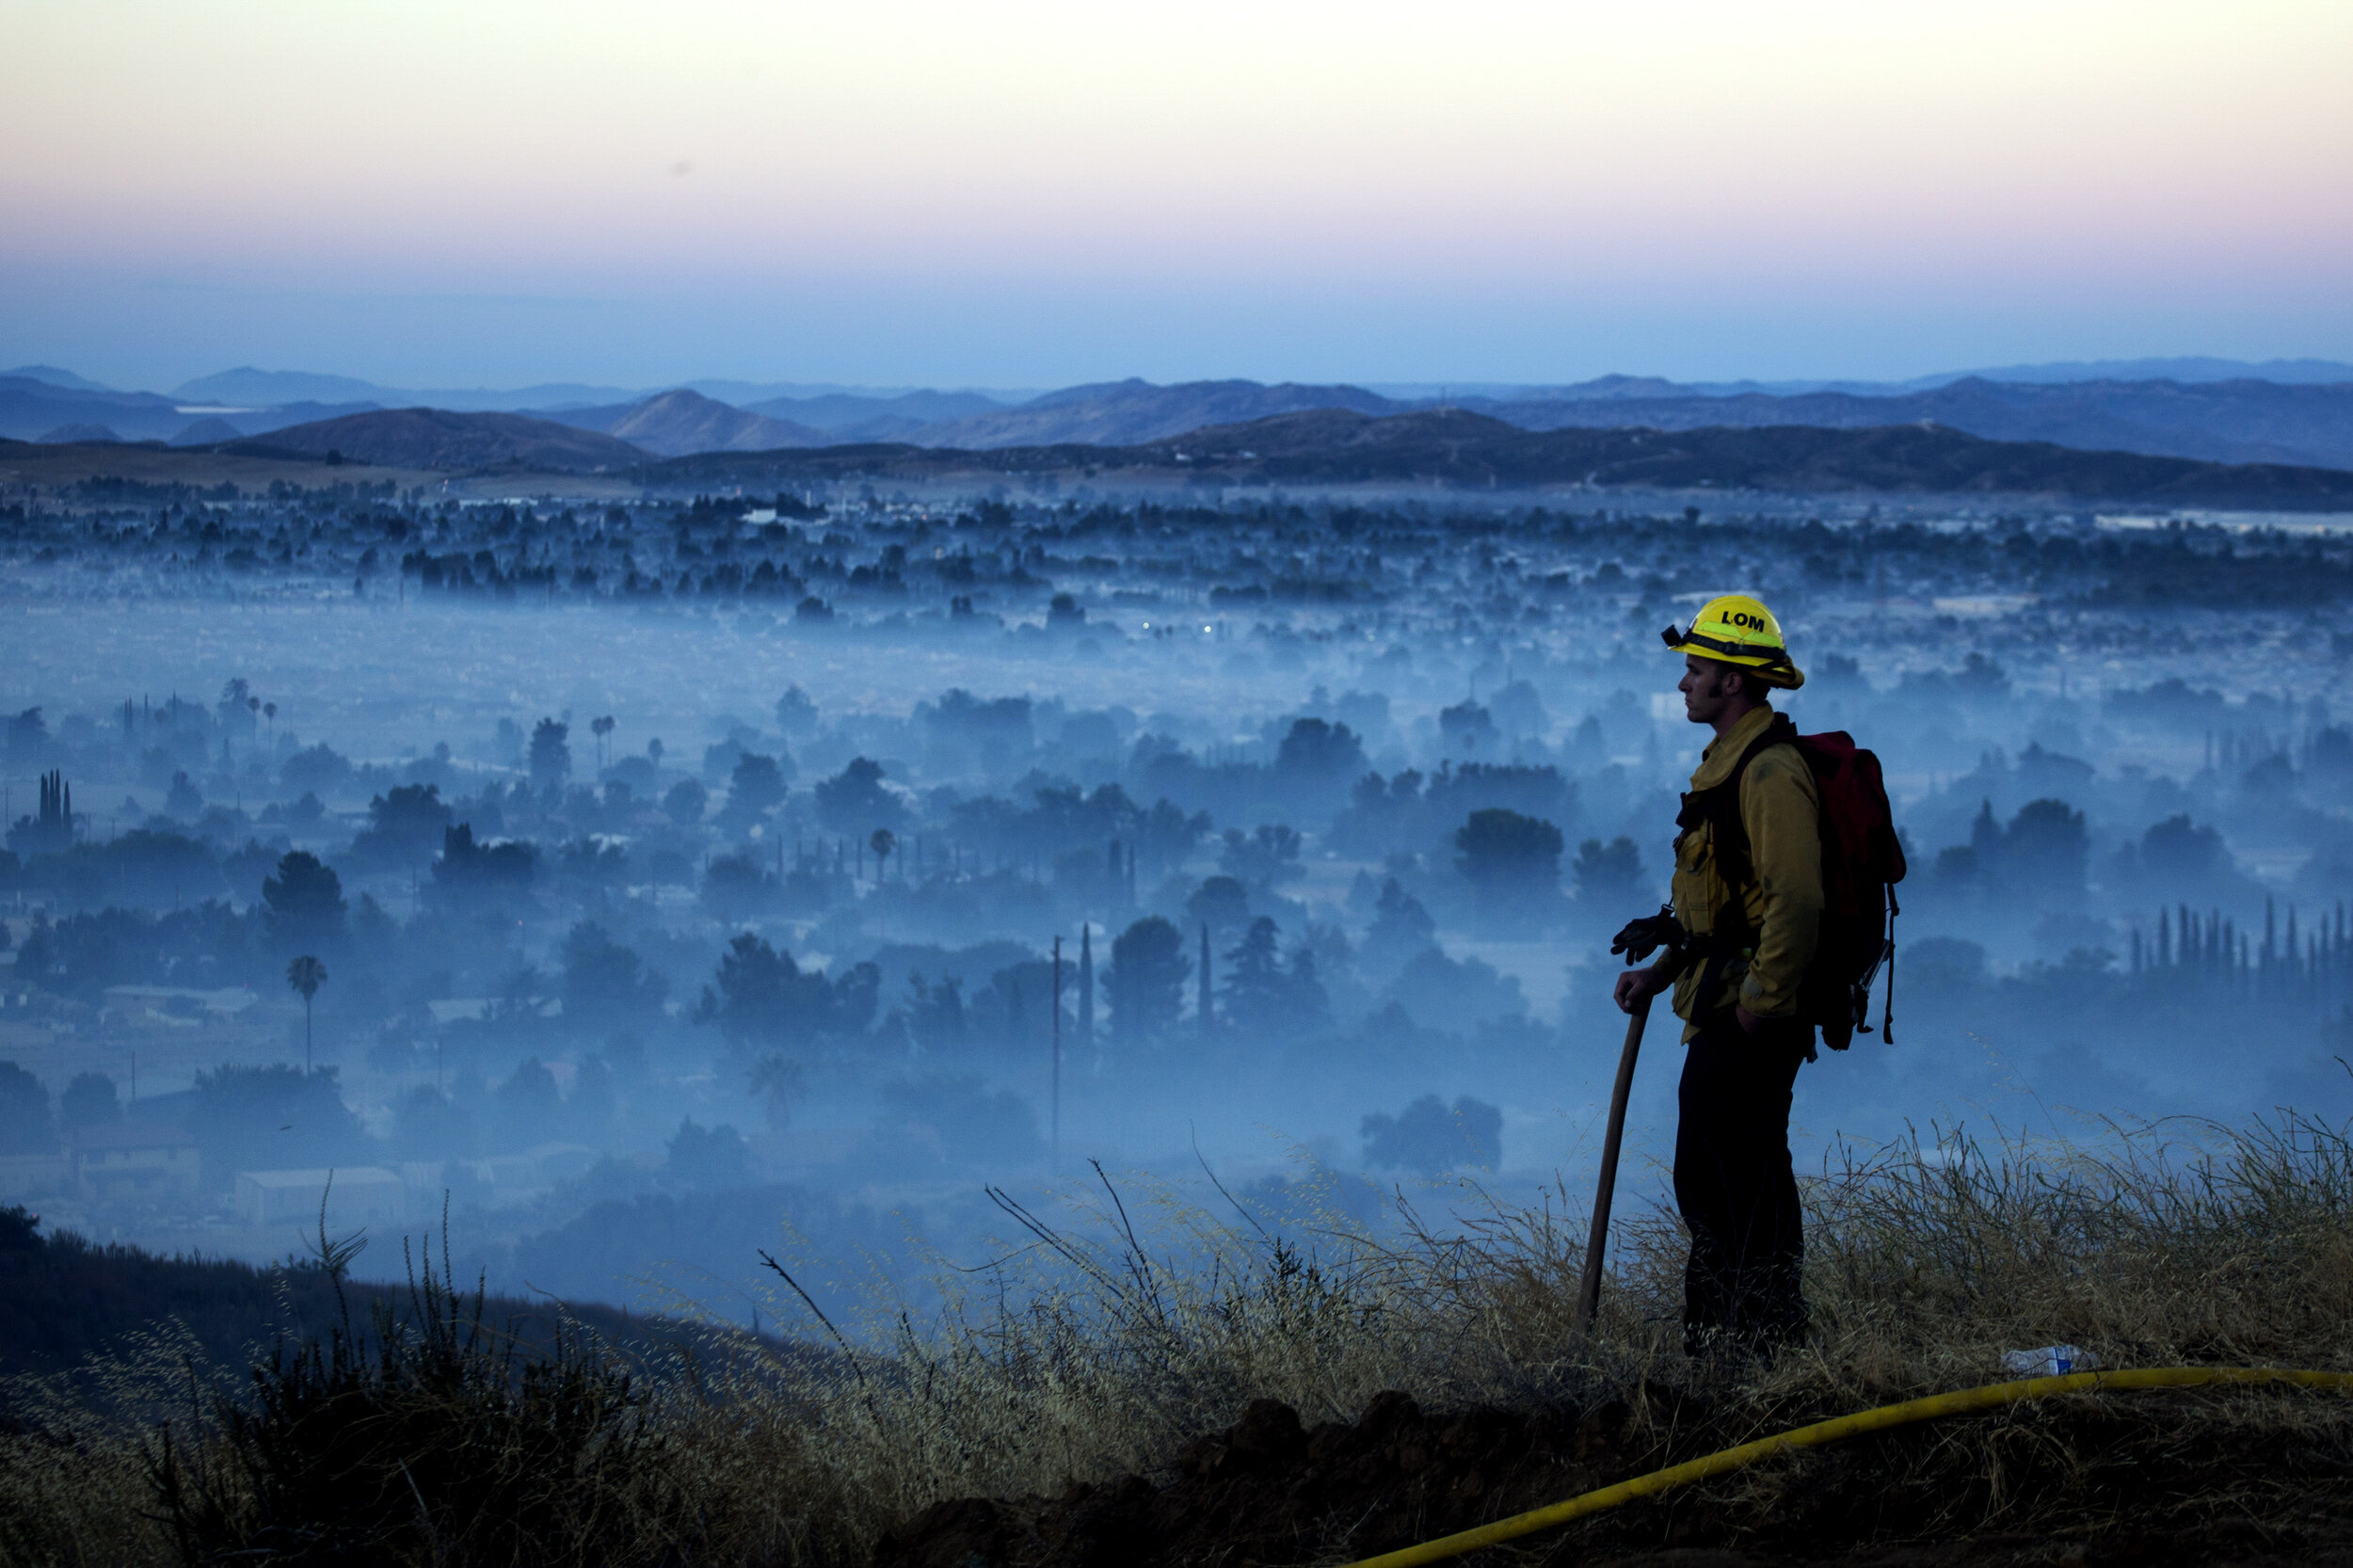  A firefighter watches a brush fire as smoke from the Apple Fire covers the city in Banning, Calif., Saturday, Aug. 1, 2020. The 2020 California wildfire season was characterized by a record-setting year of wildfires that burned across the state of C